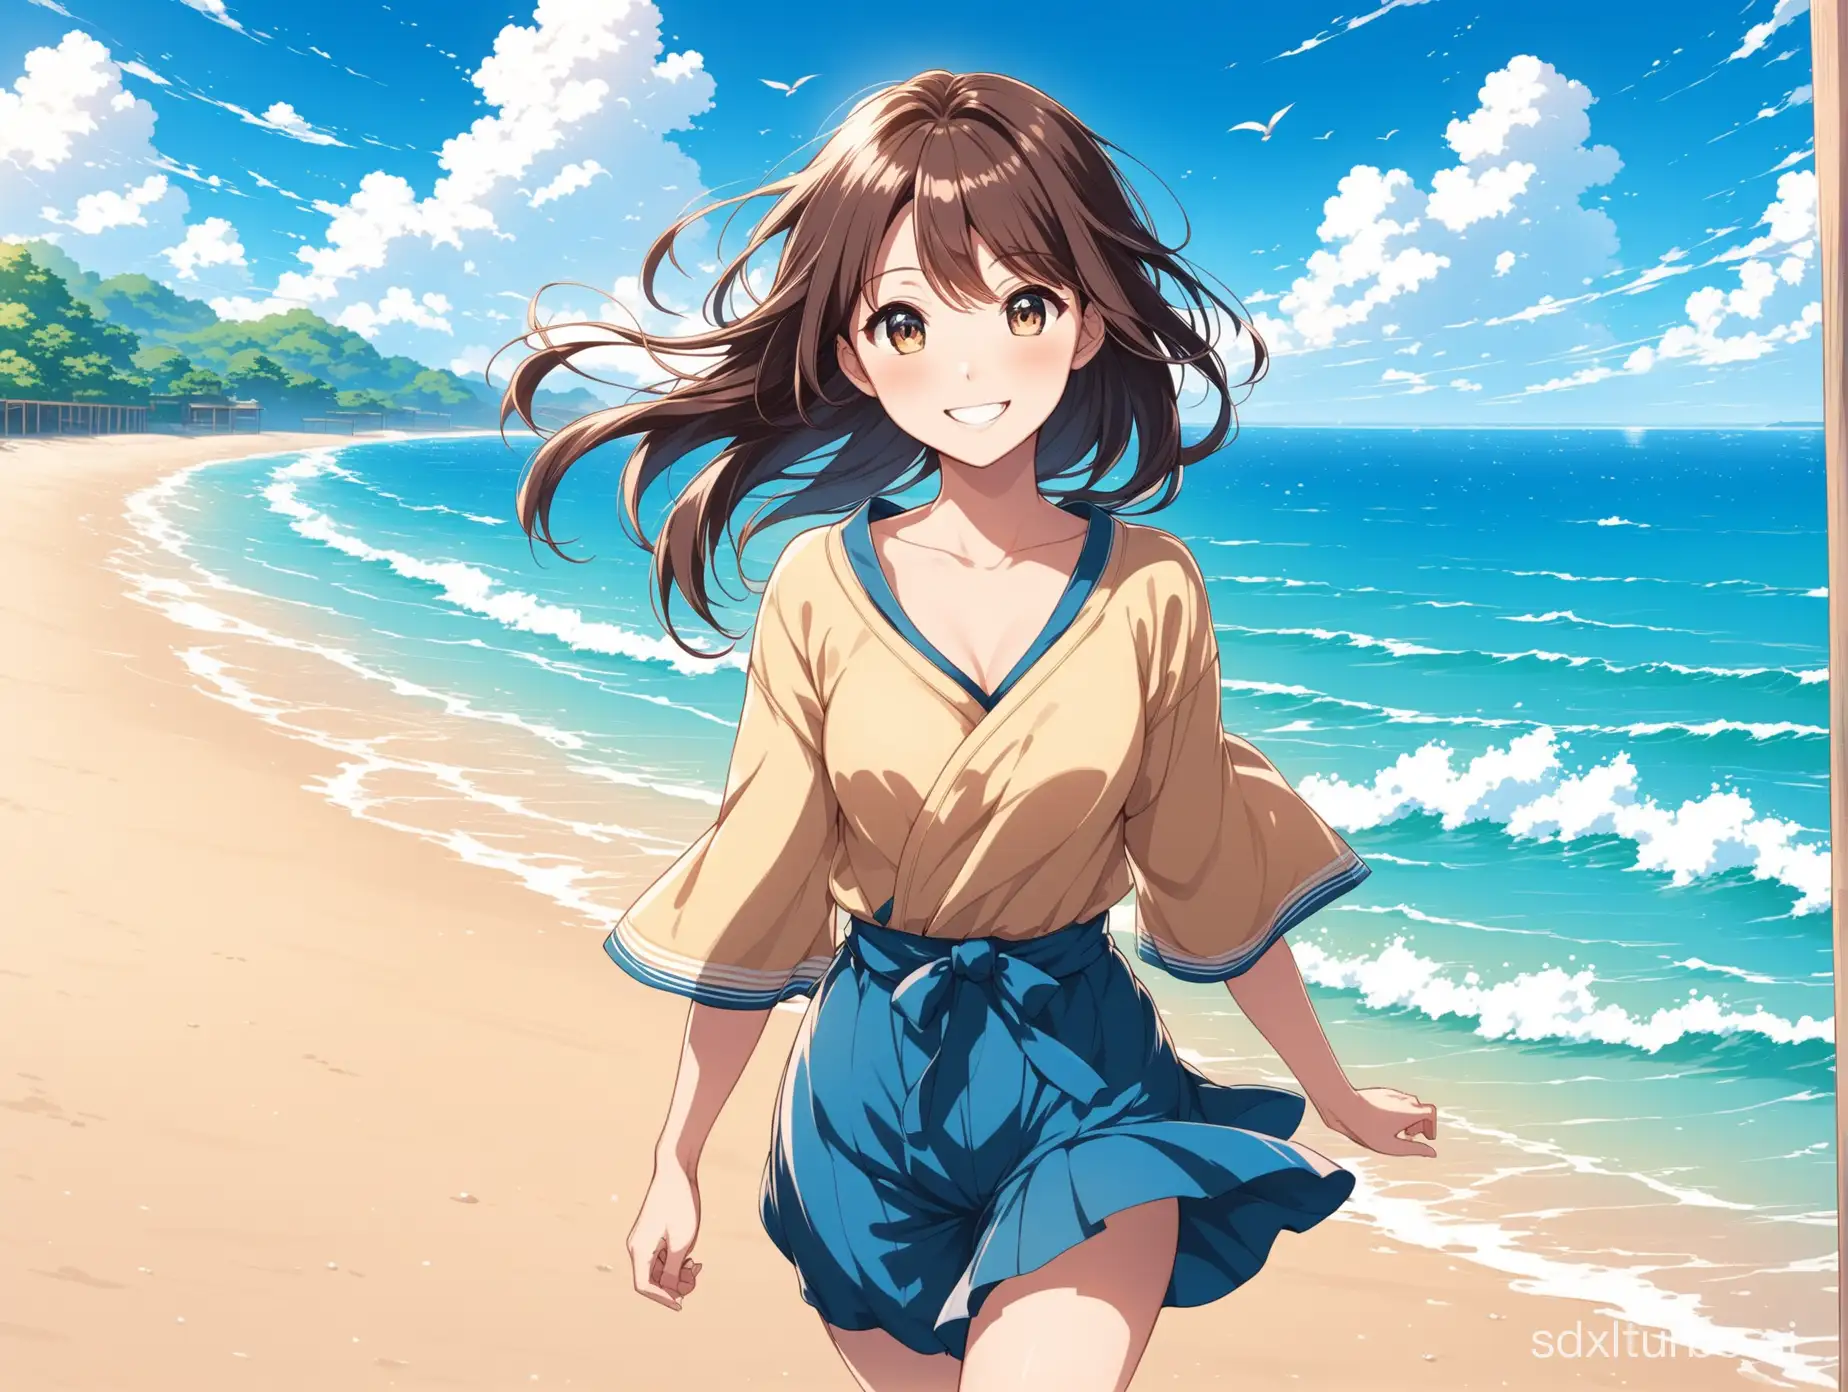 Japanese anime style，front view，
smile in the wind，a girl is walking At the beach